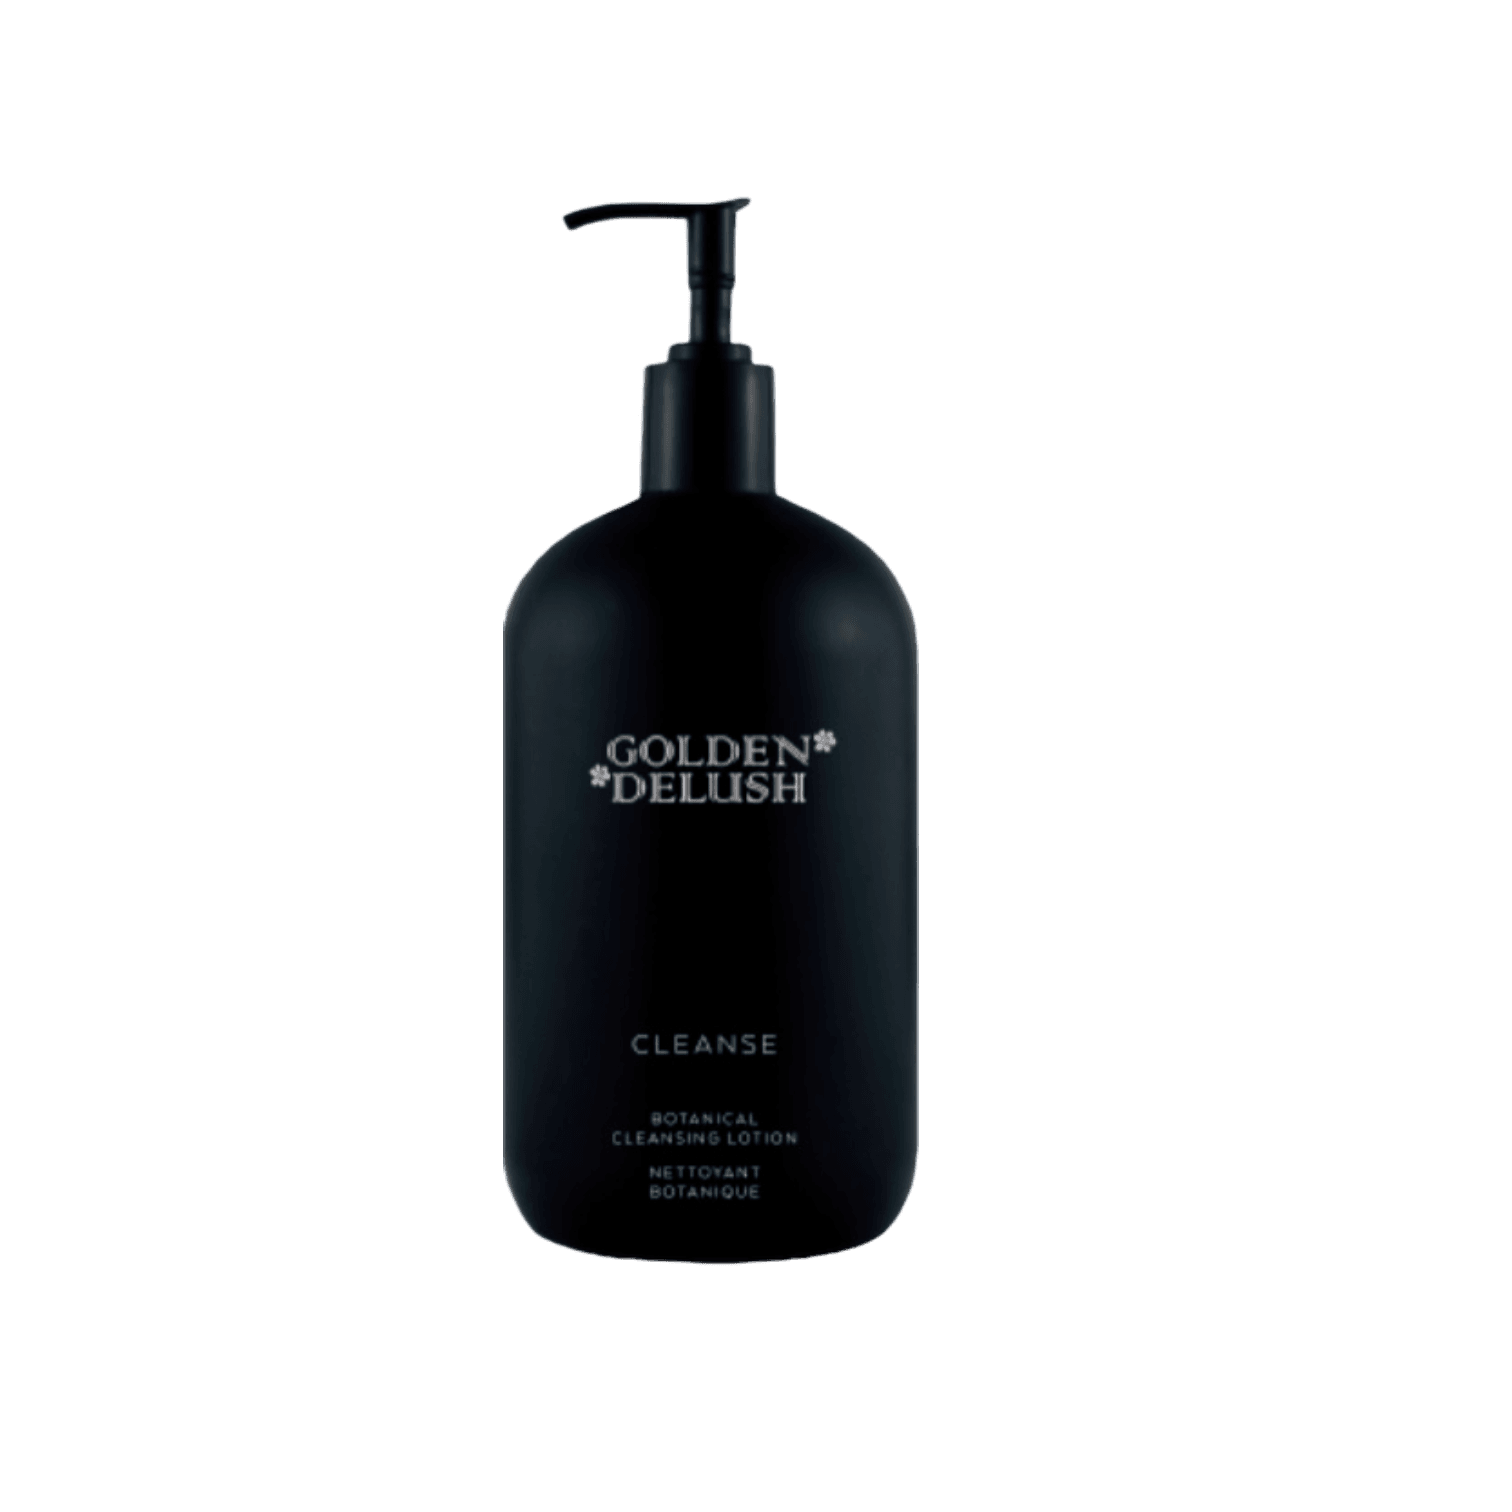 900 ML Cleanse Amazing on dry skin